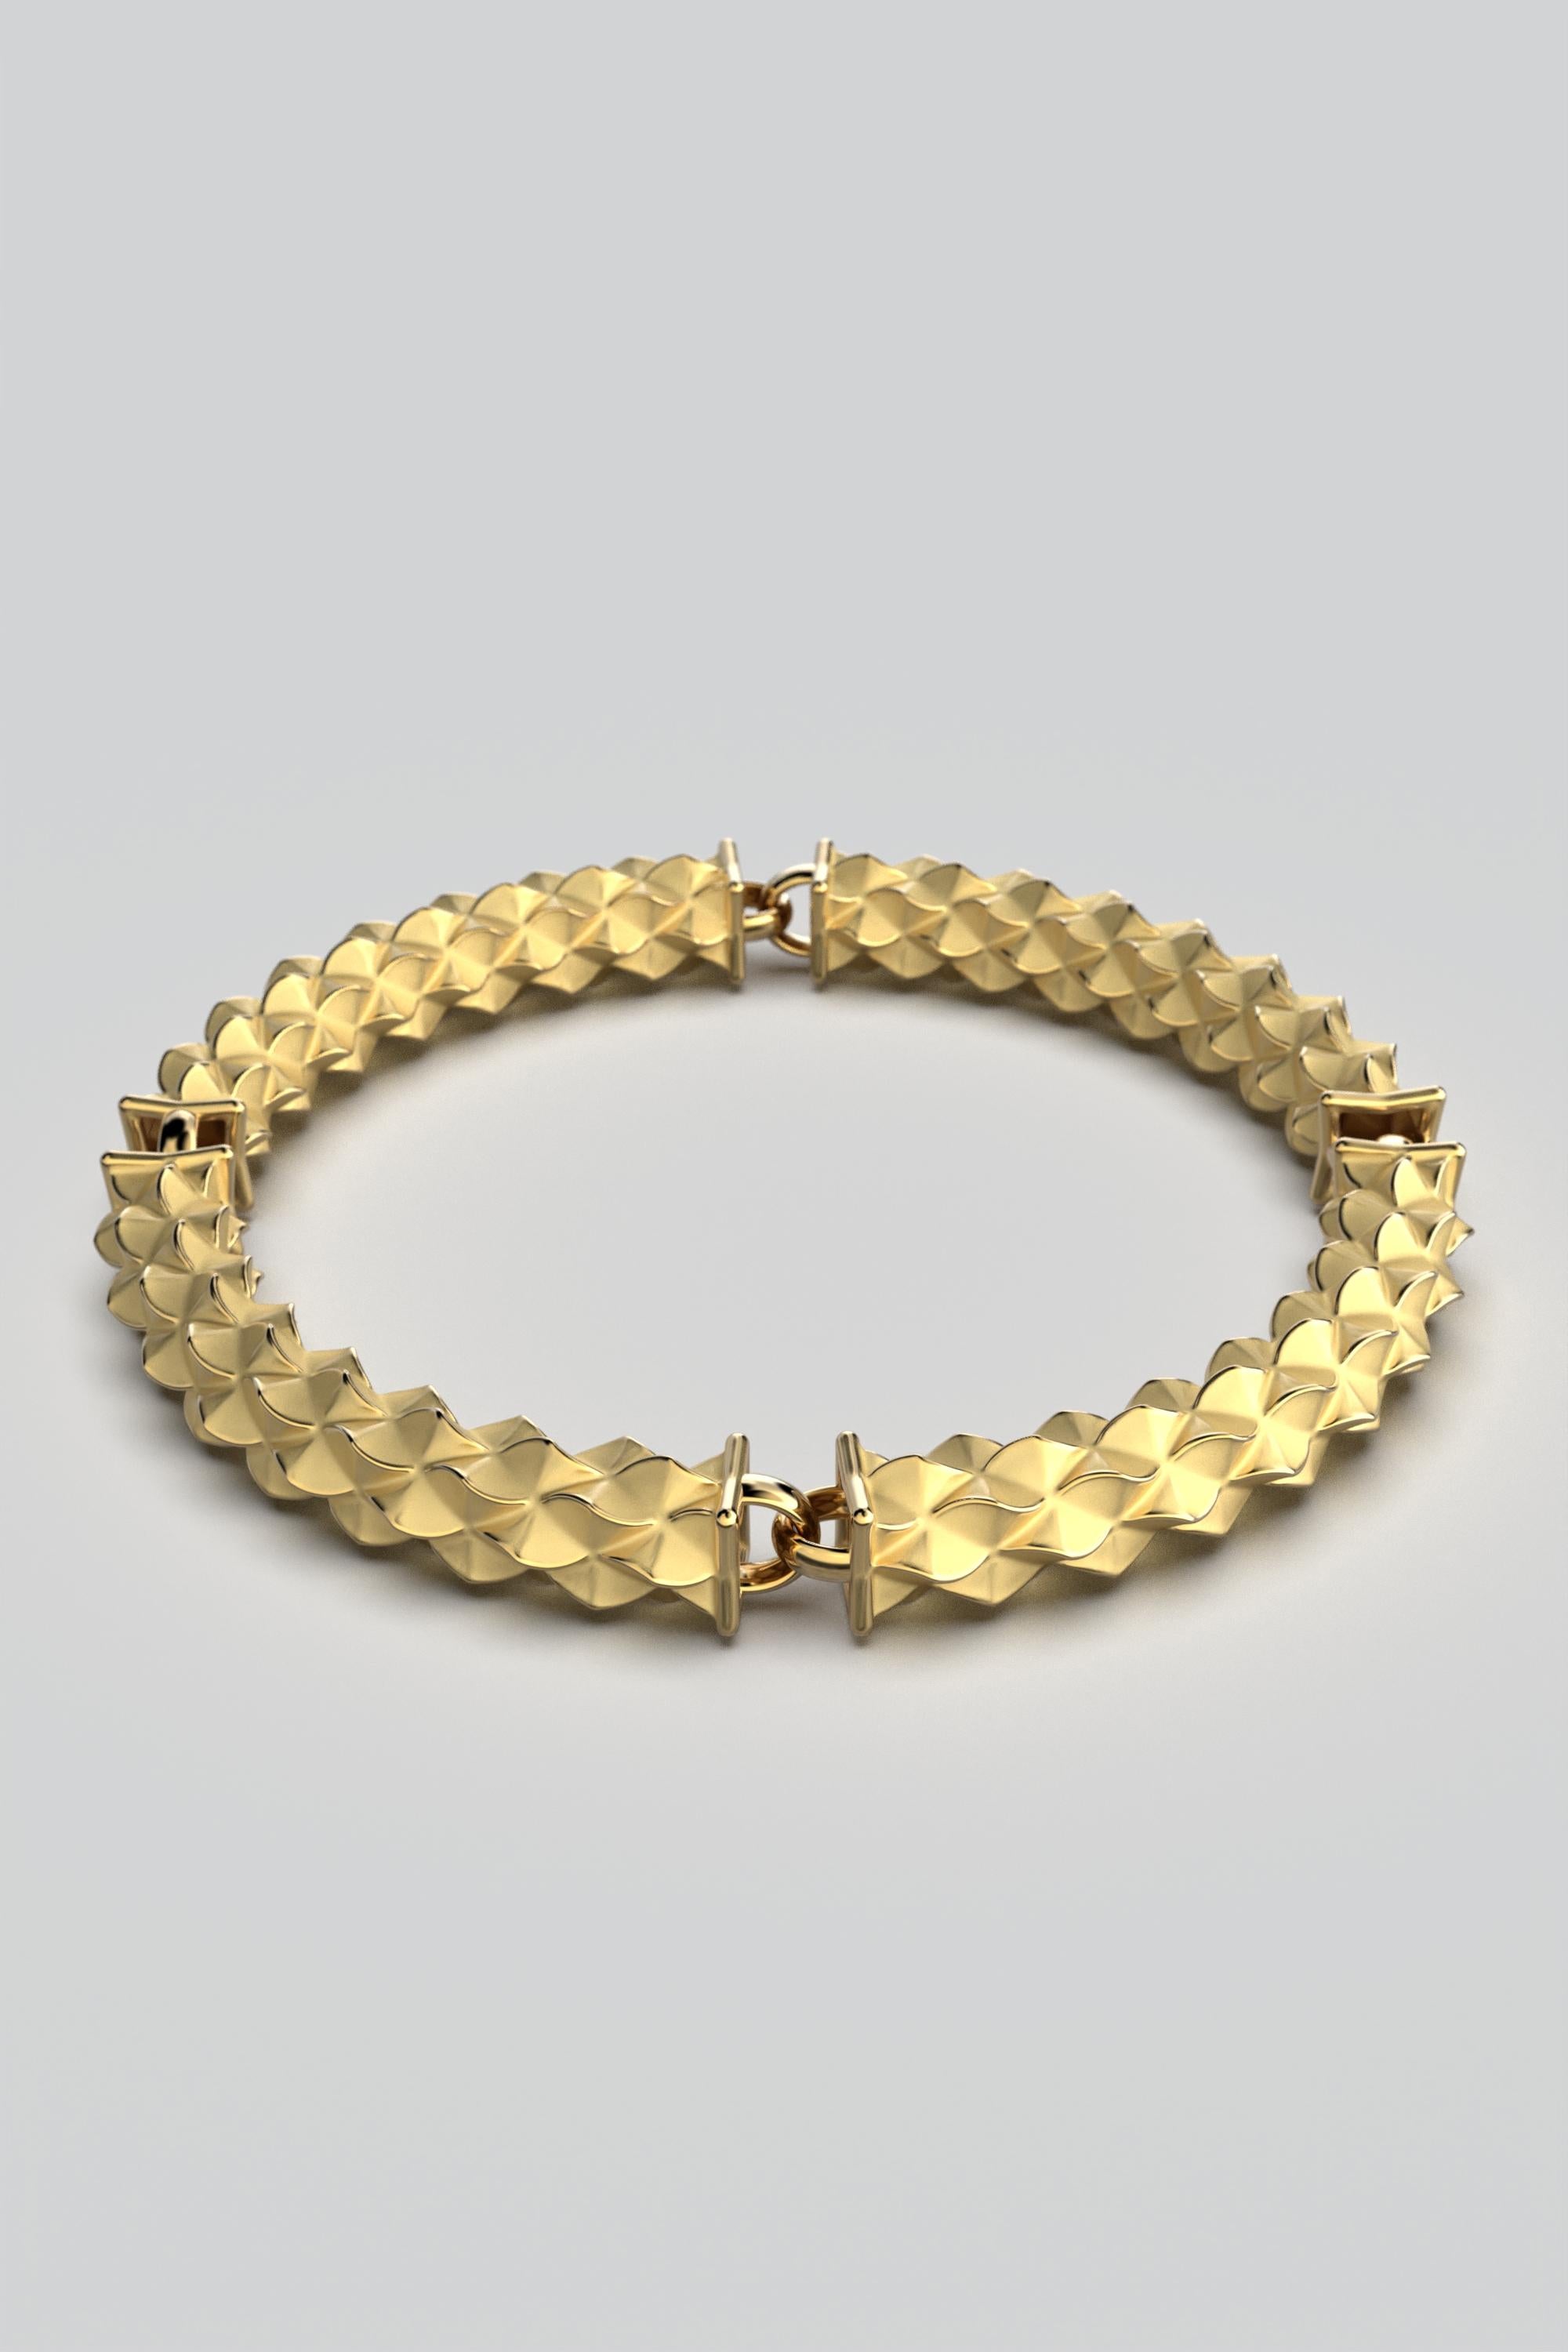 Exquisite Made to order 18k Gold Desert Dunes Bracelet

Elevate your style with the epitome of luxury and craftsmanship – our semi-rigid gold bracelet, expertly designed and produced exclusively to order in the heart of Italy. Crafted to perfection,